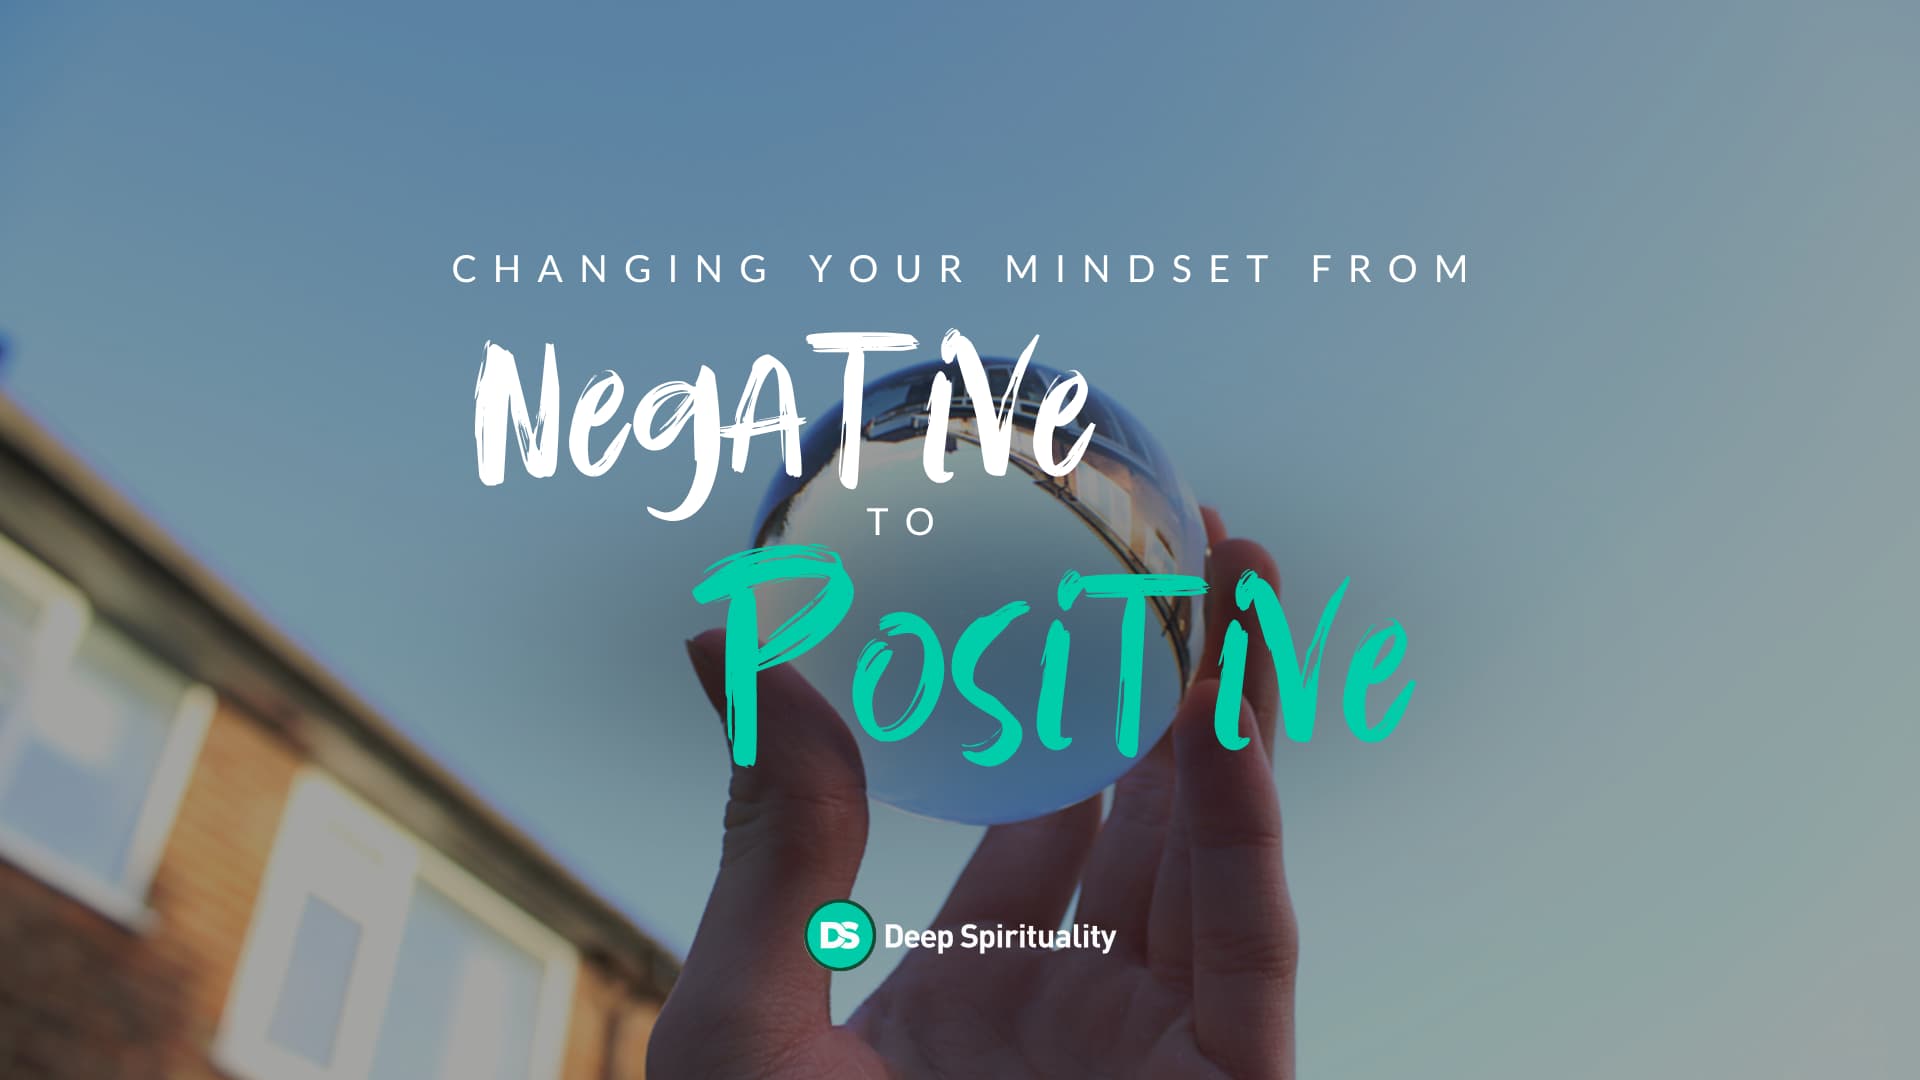 Changing Your Mindset From Negative to Positive  53